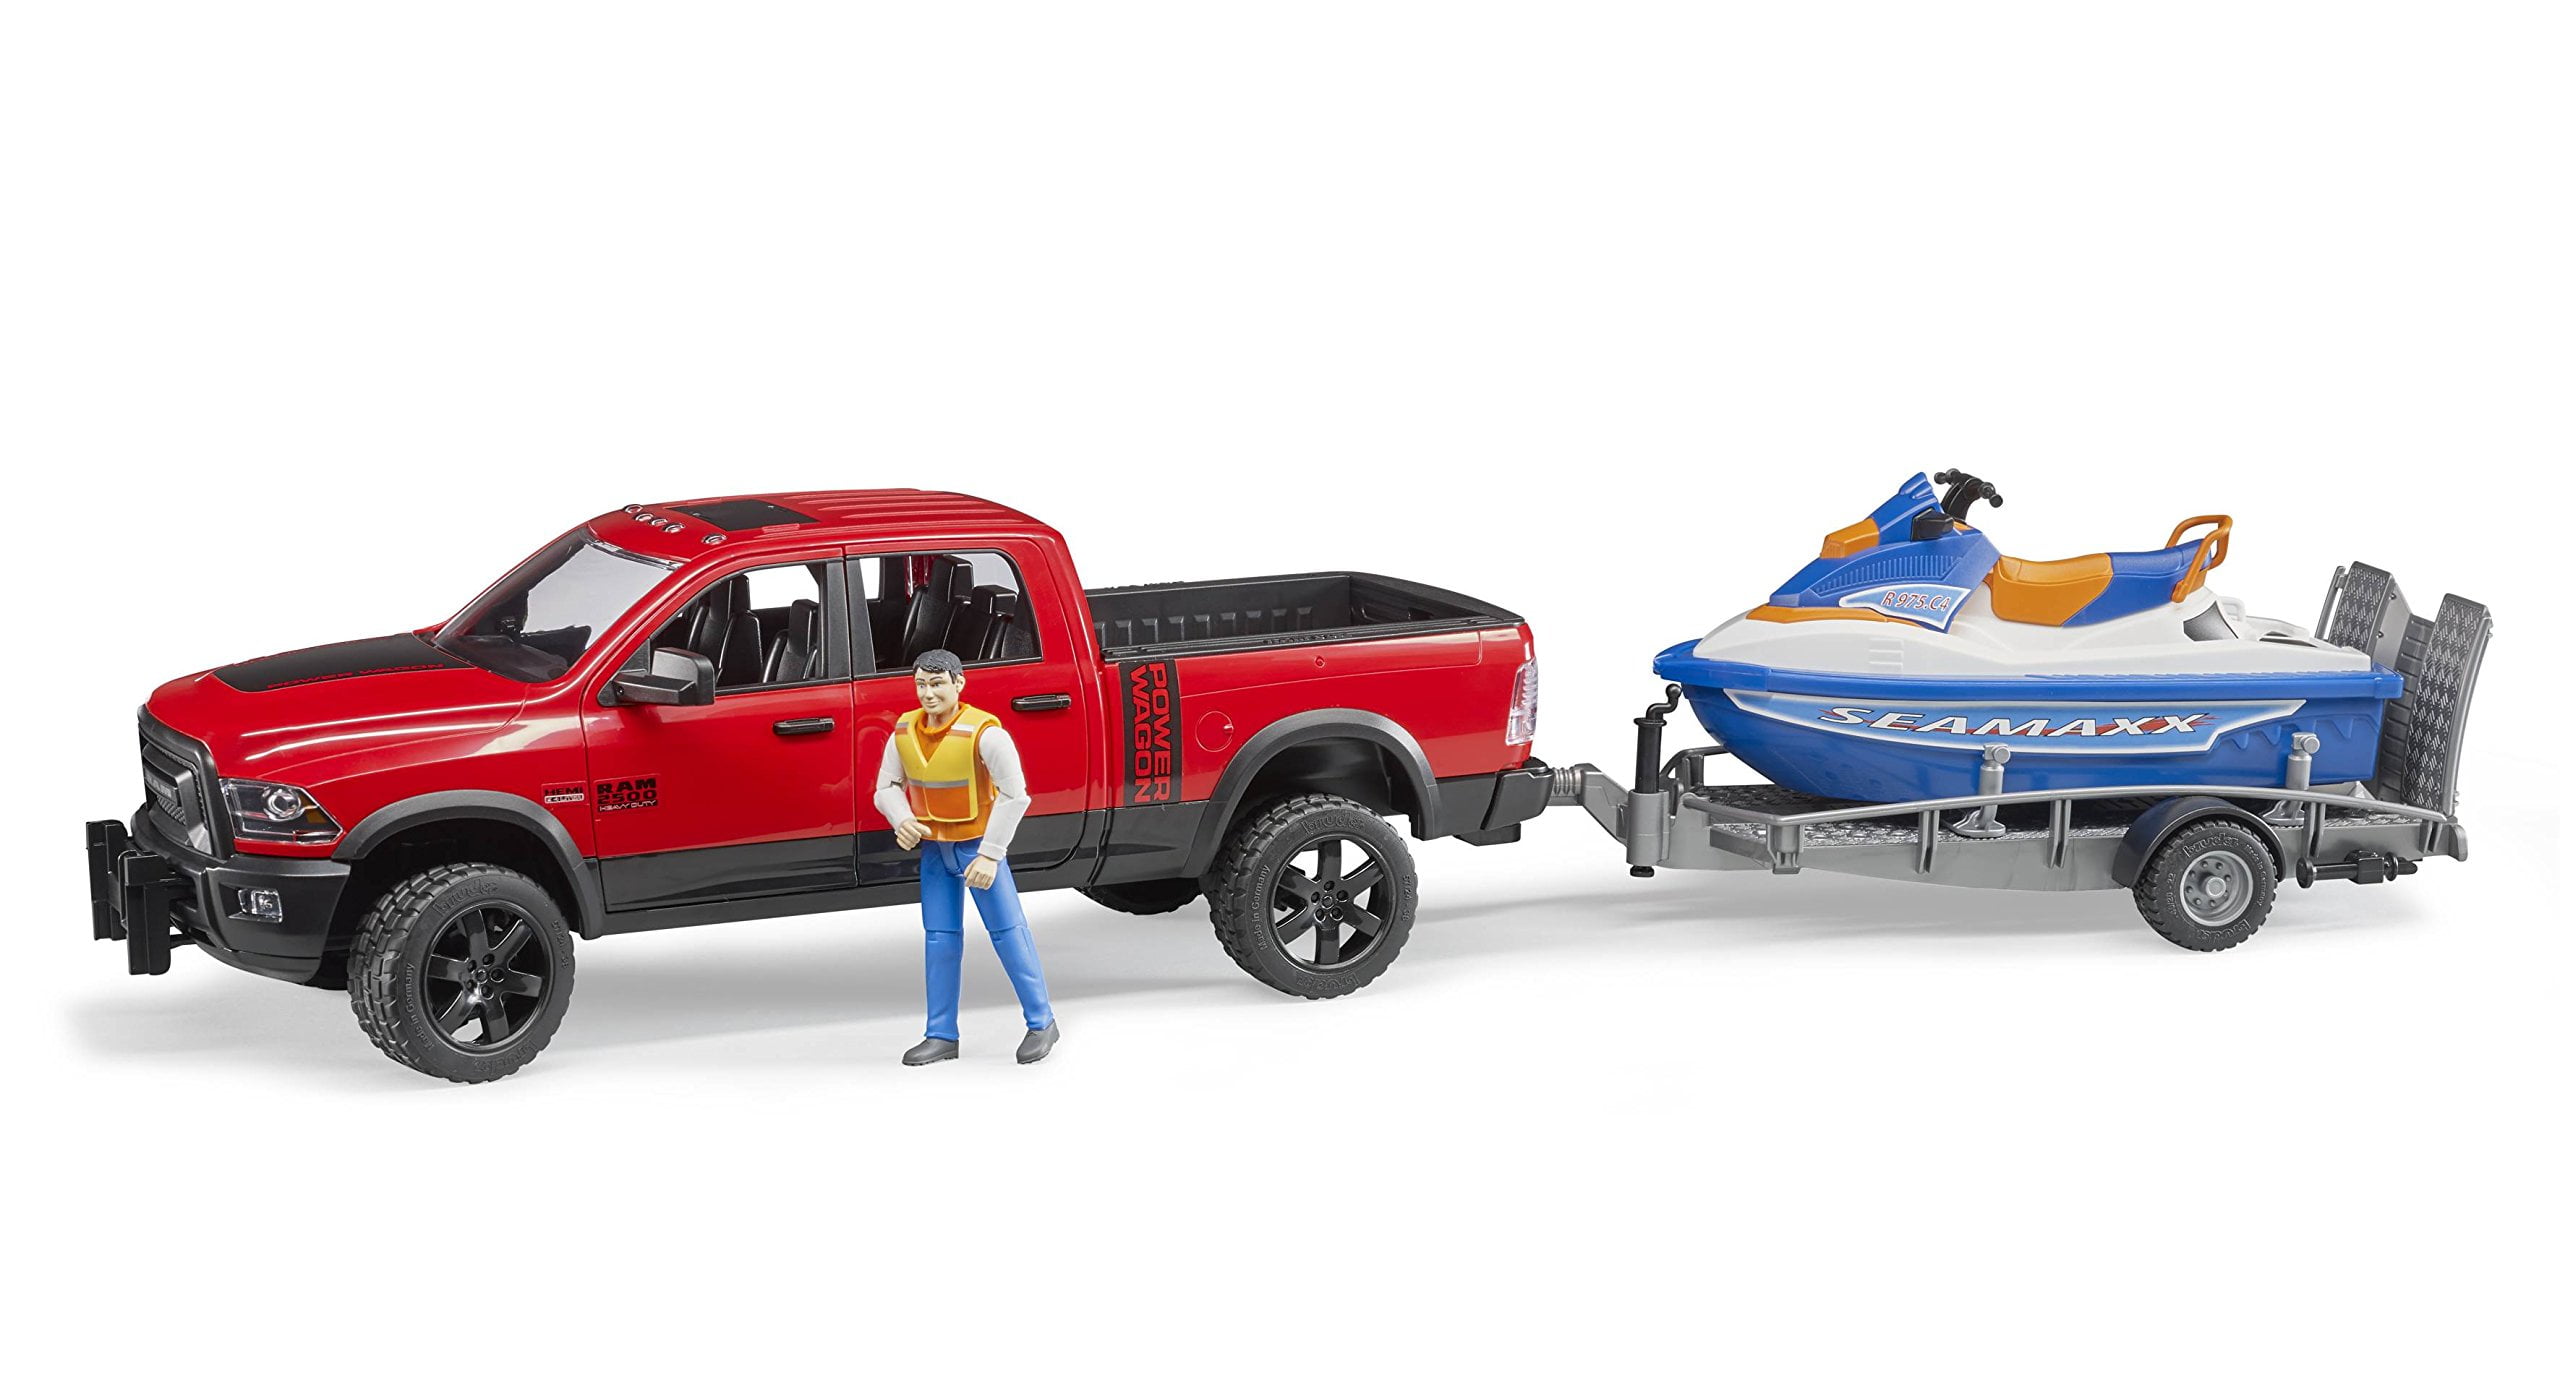 Bruder Ram 2500 Power Wagon Trailer and Water Craft with Driver - Walmart.com